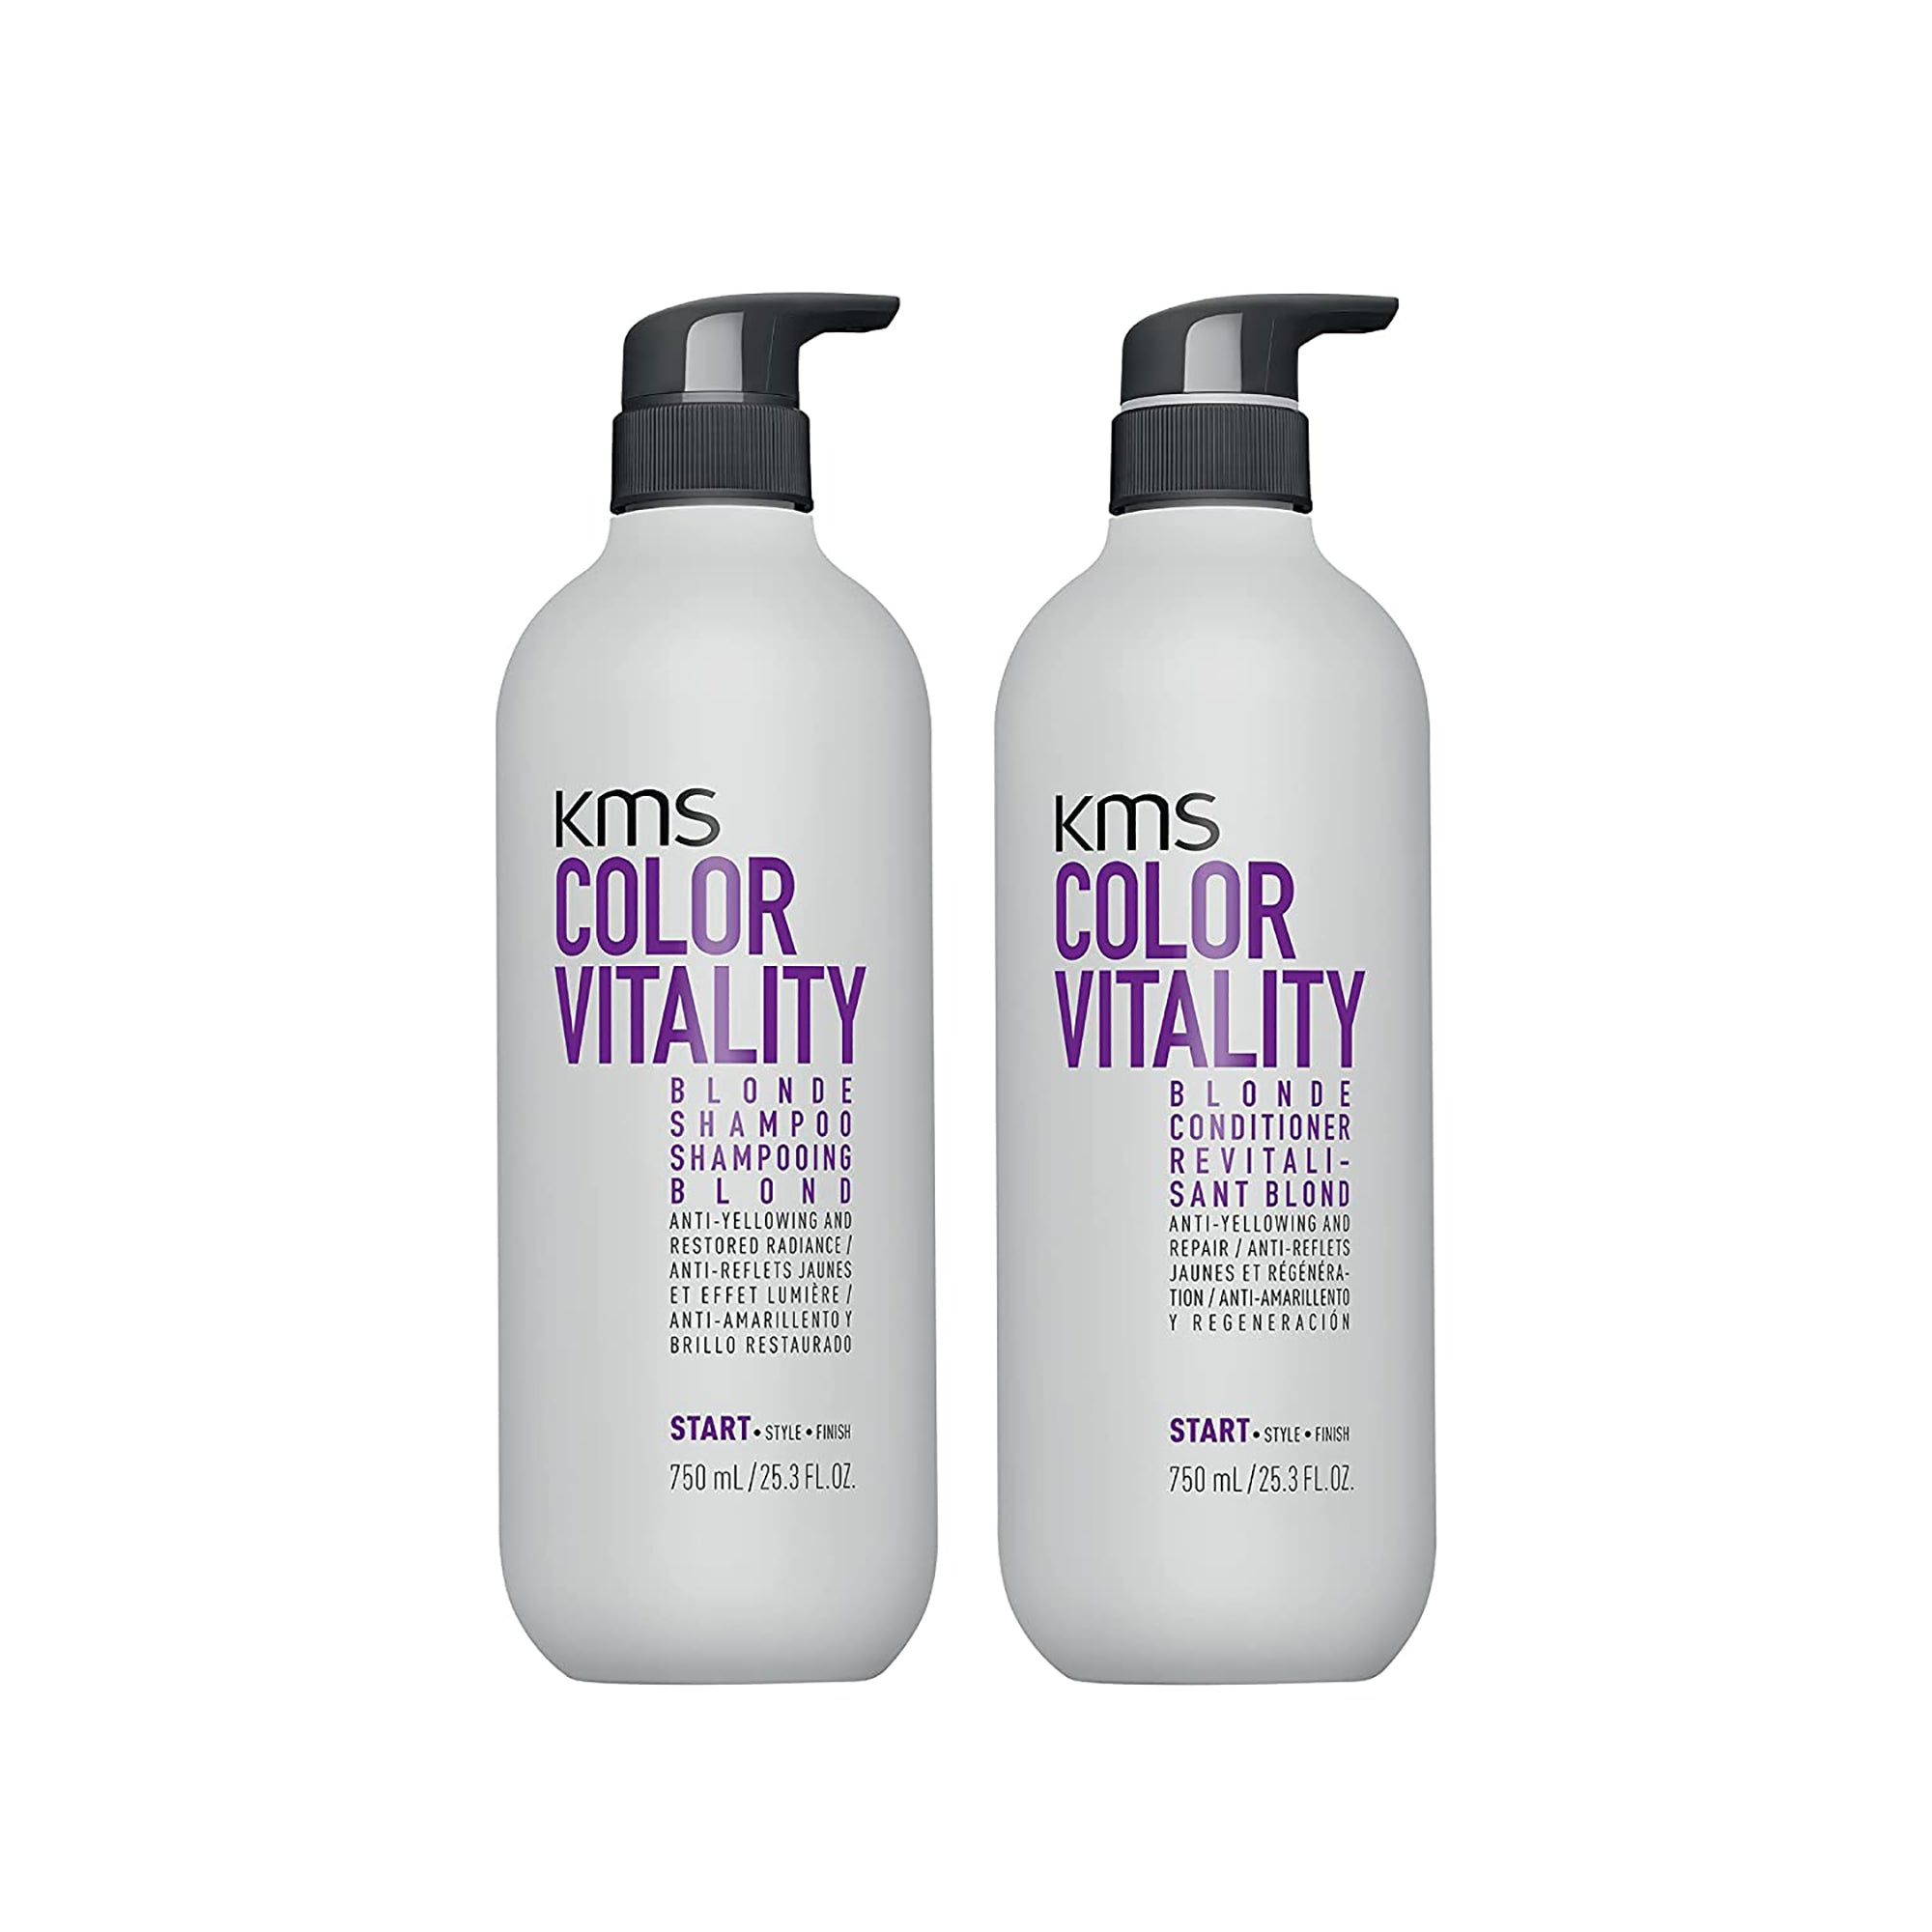 KMS Colorvitality Blonde Shampoo & Conditioner Duo - 25 oz / 25OZ